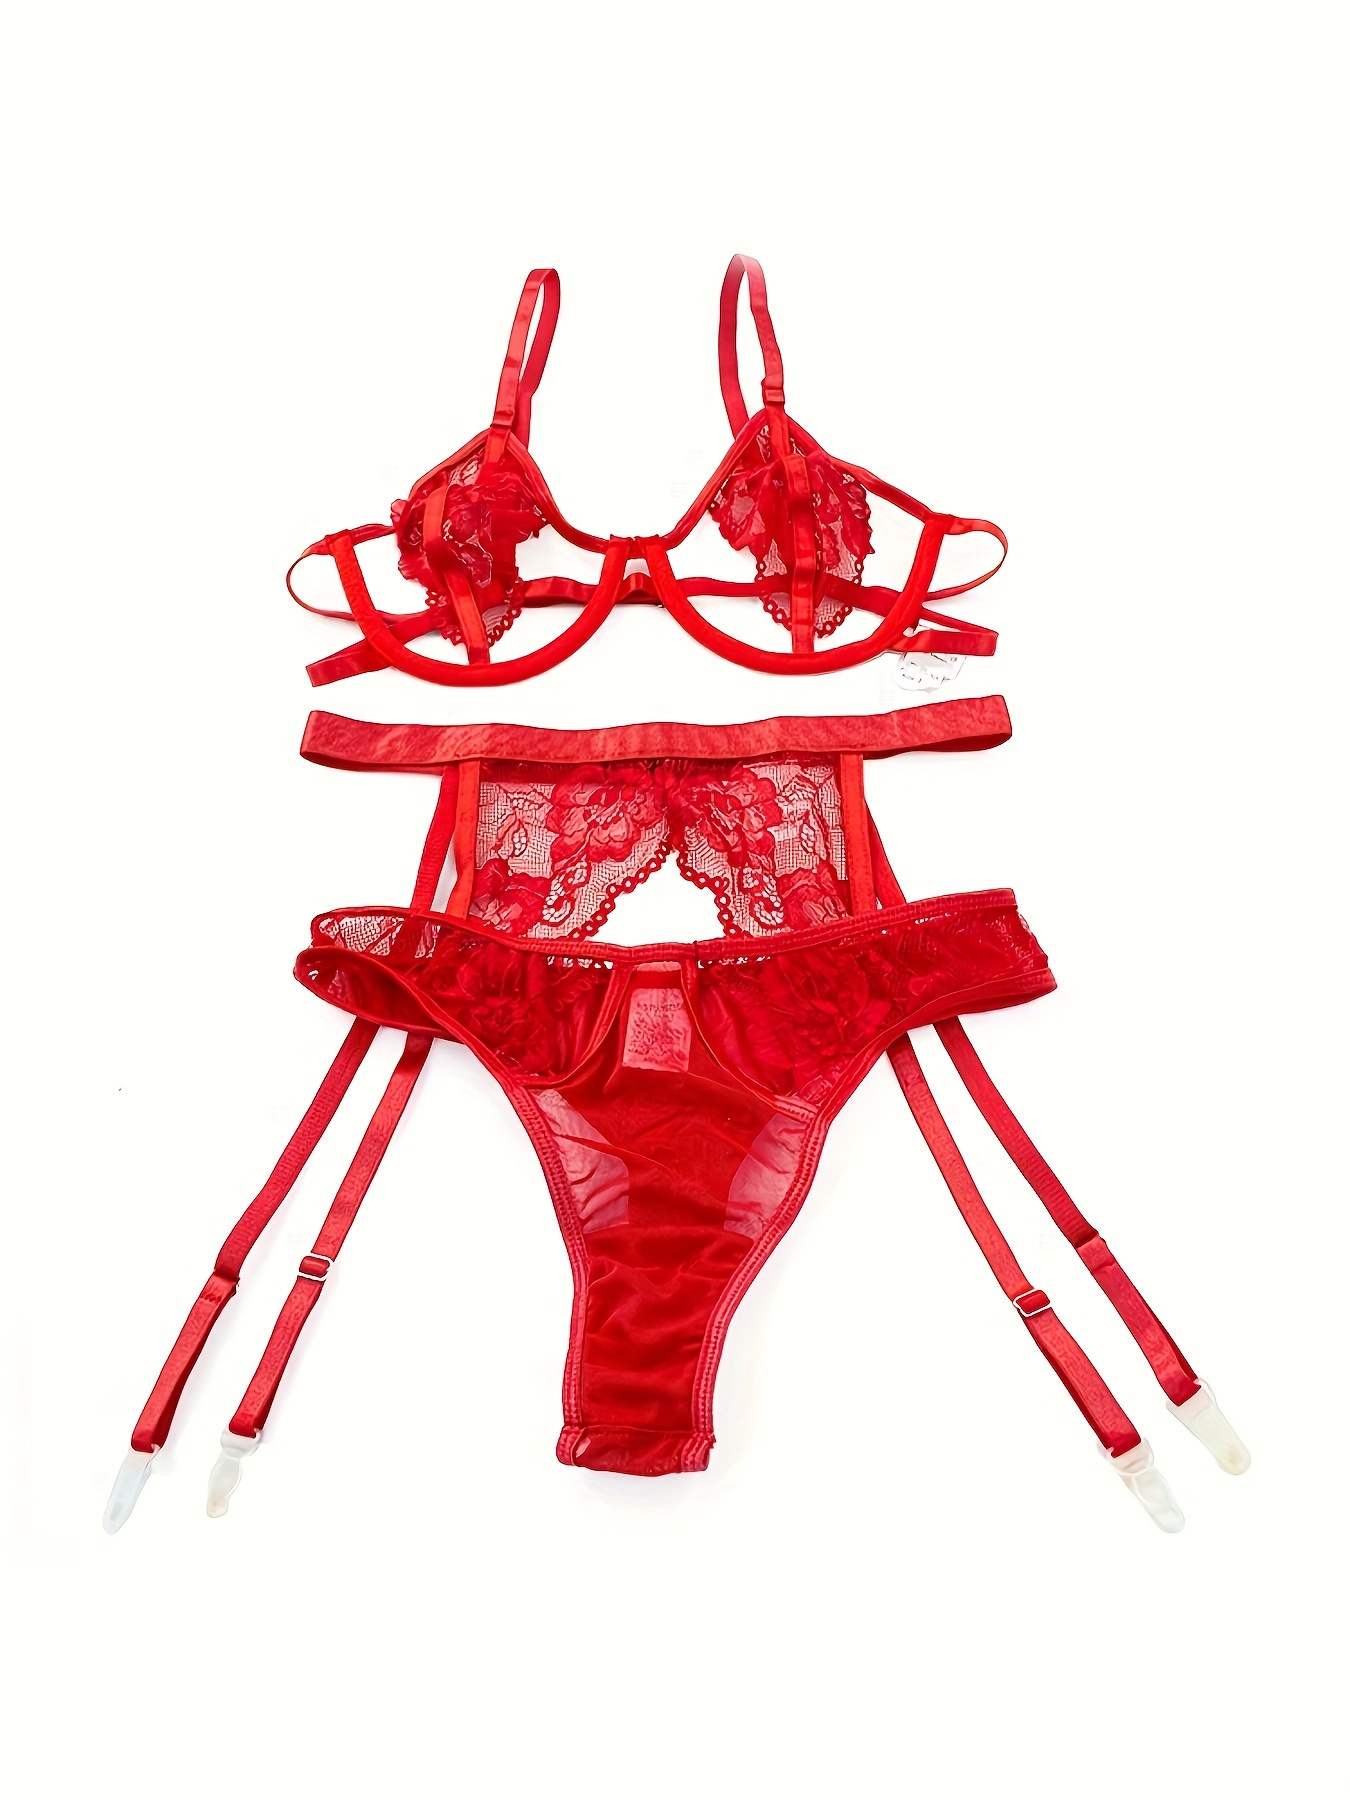 Buy Da Intimo Floral Lacy Lingerie Set - Red Online